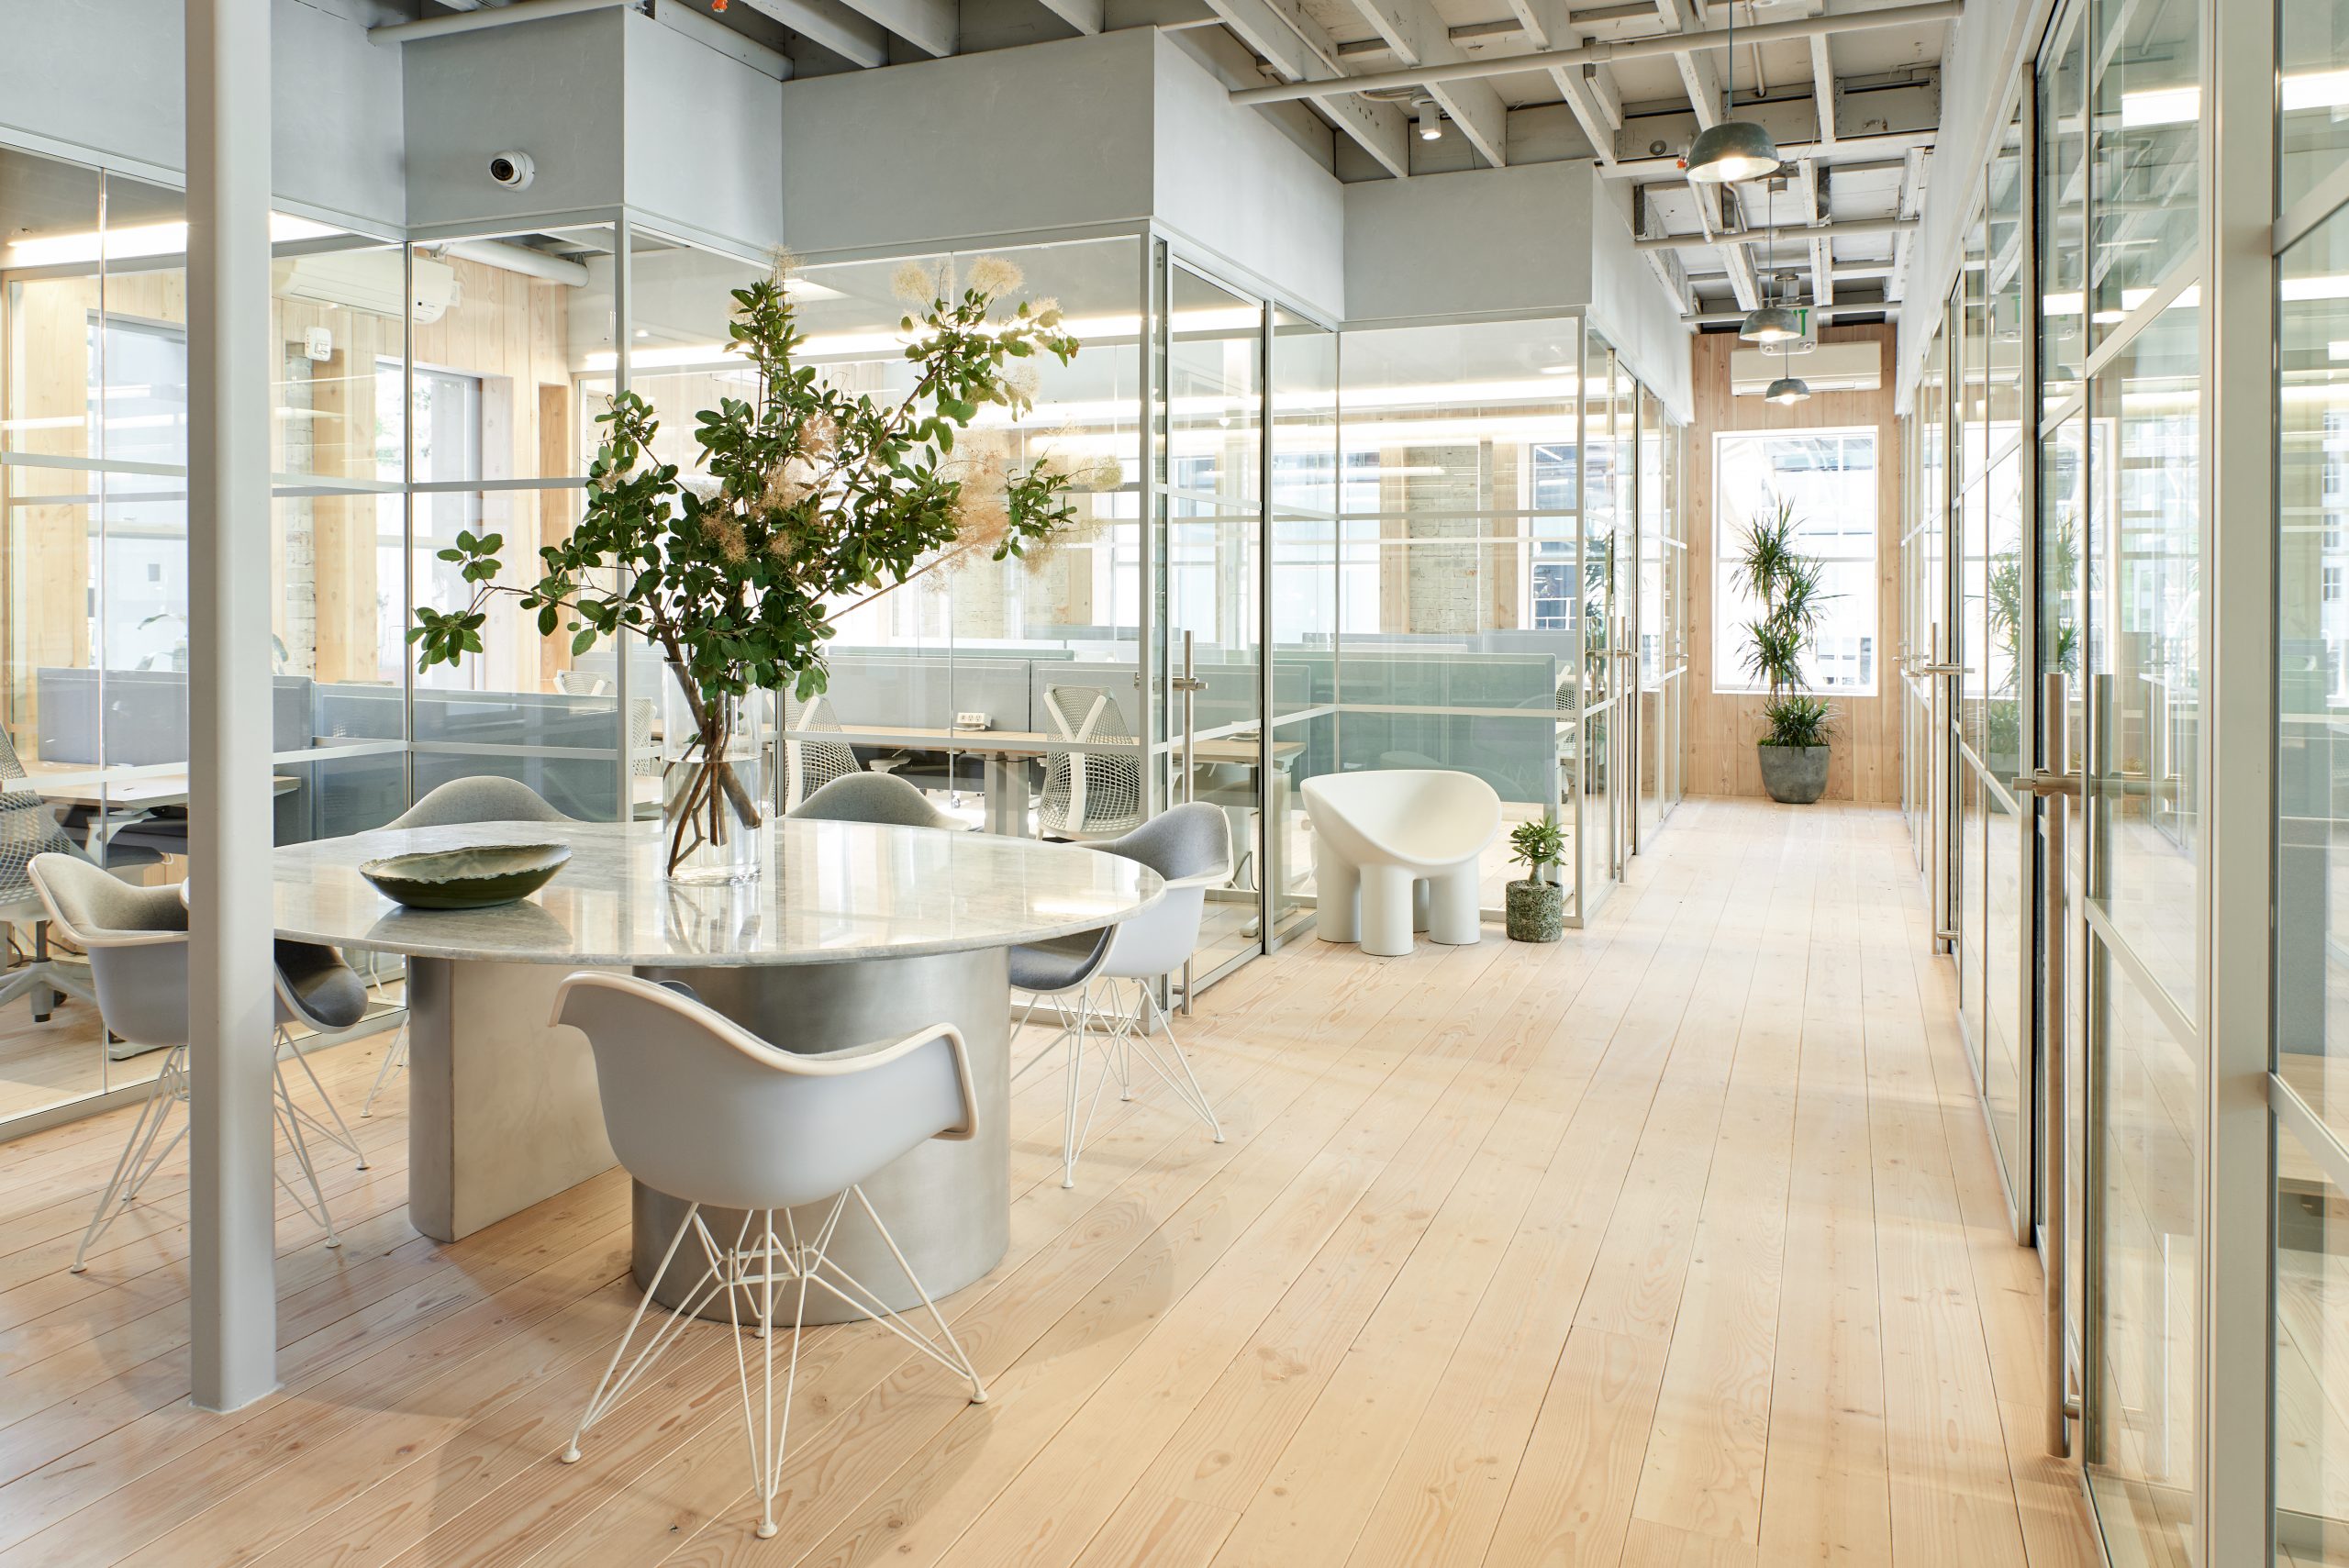 Interior of a coworking space designed by Yves Béhar